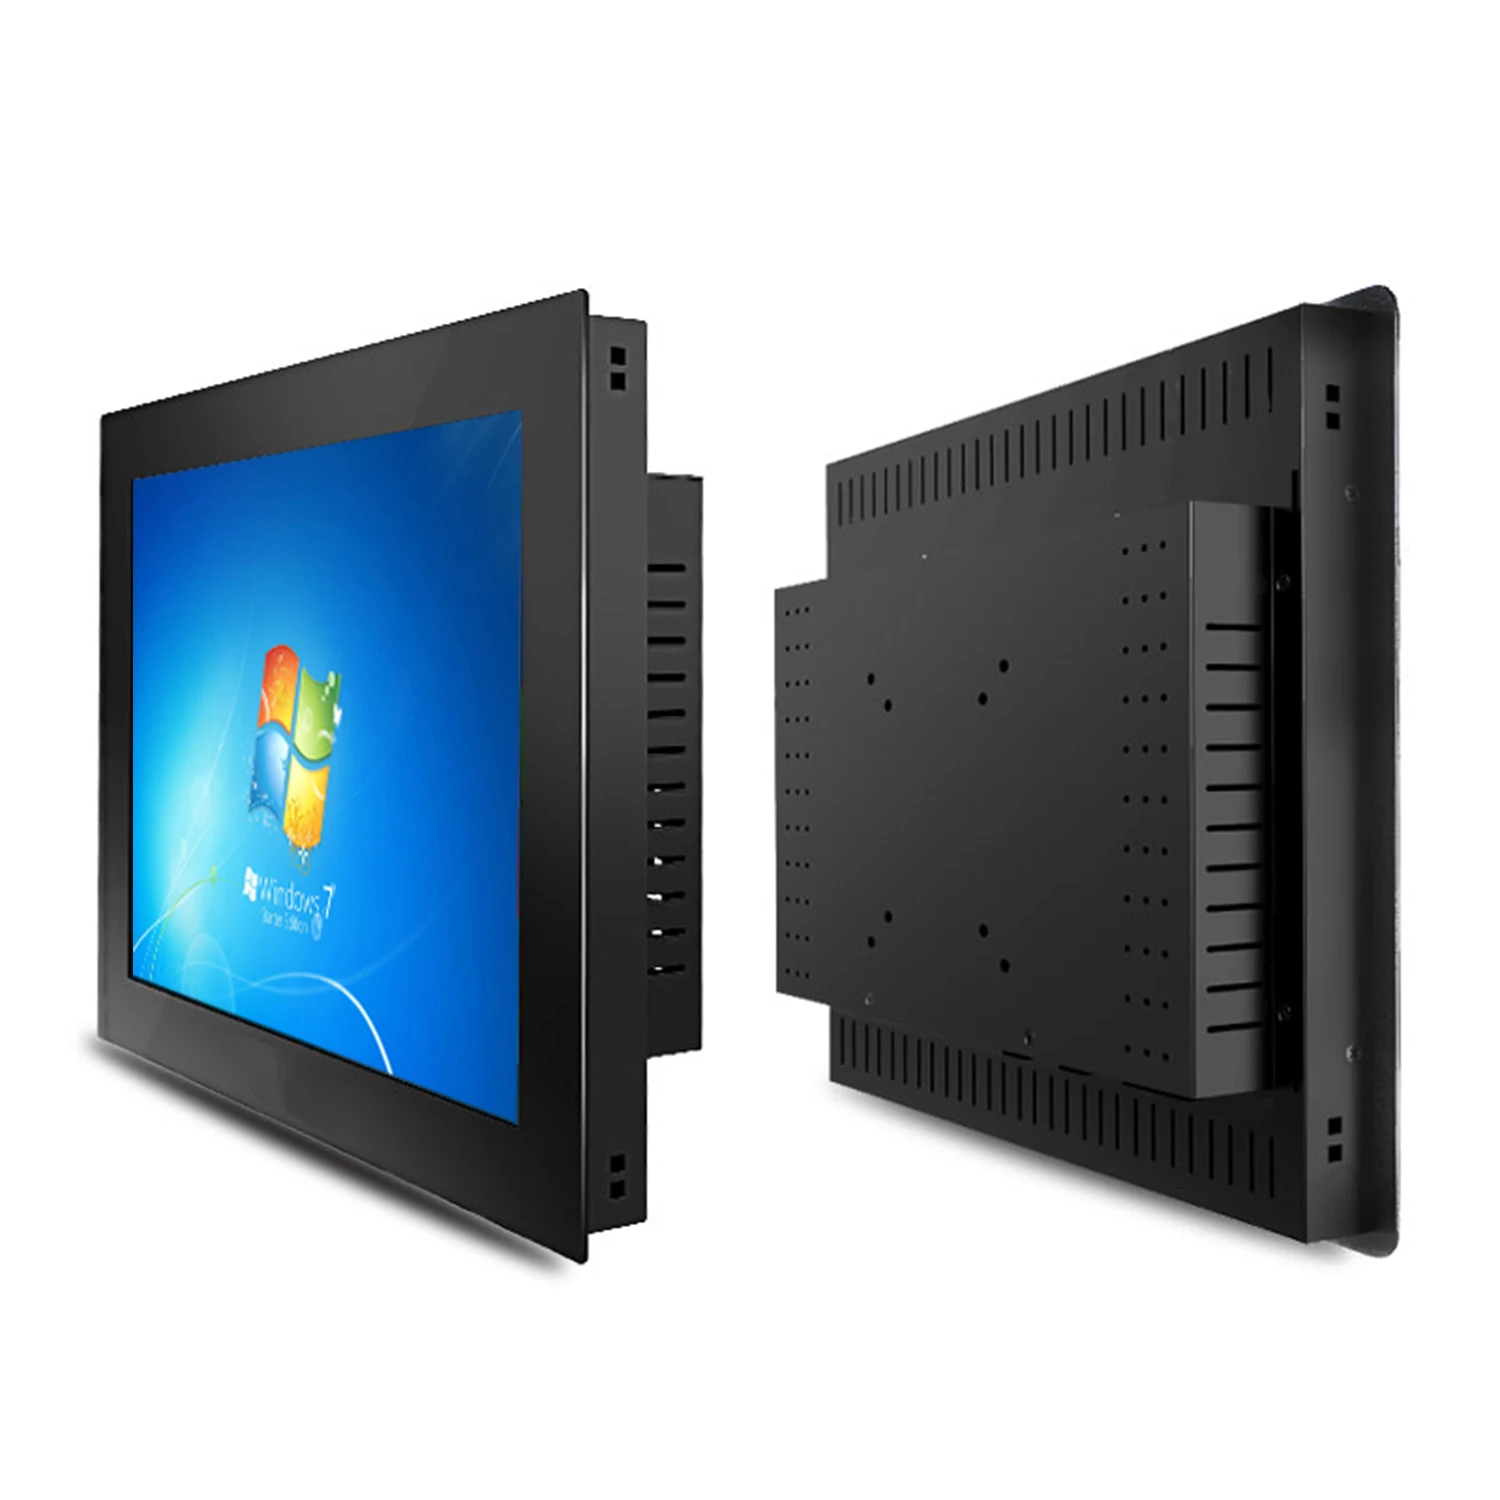 

10 12 15 17 Inch Industrial LCD Monitor Mini Panel Display with Resistive Touch Screen Buckle Embedded Install with HDMI VGA USB